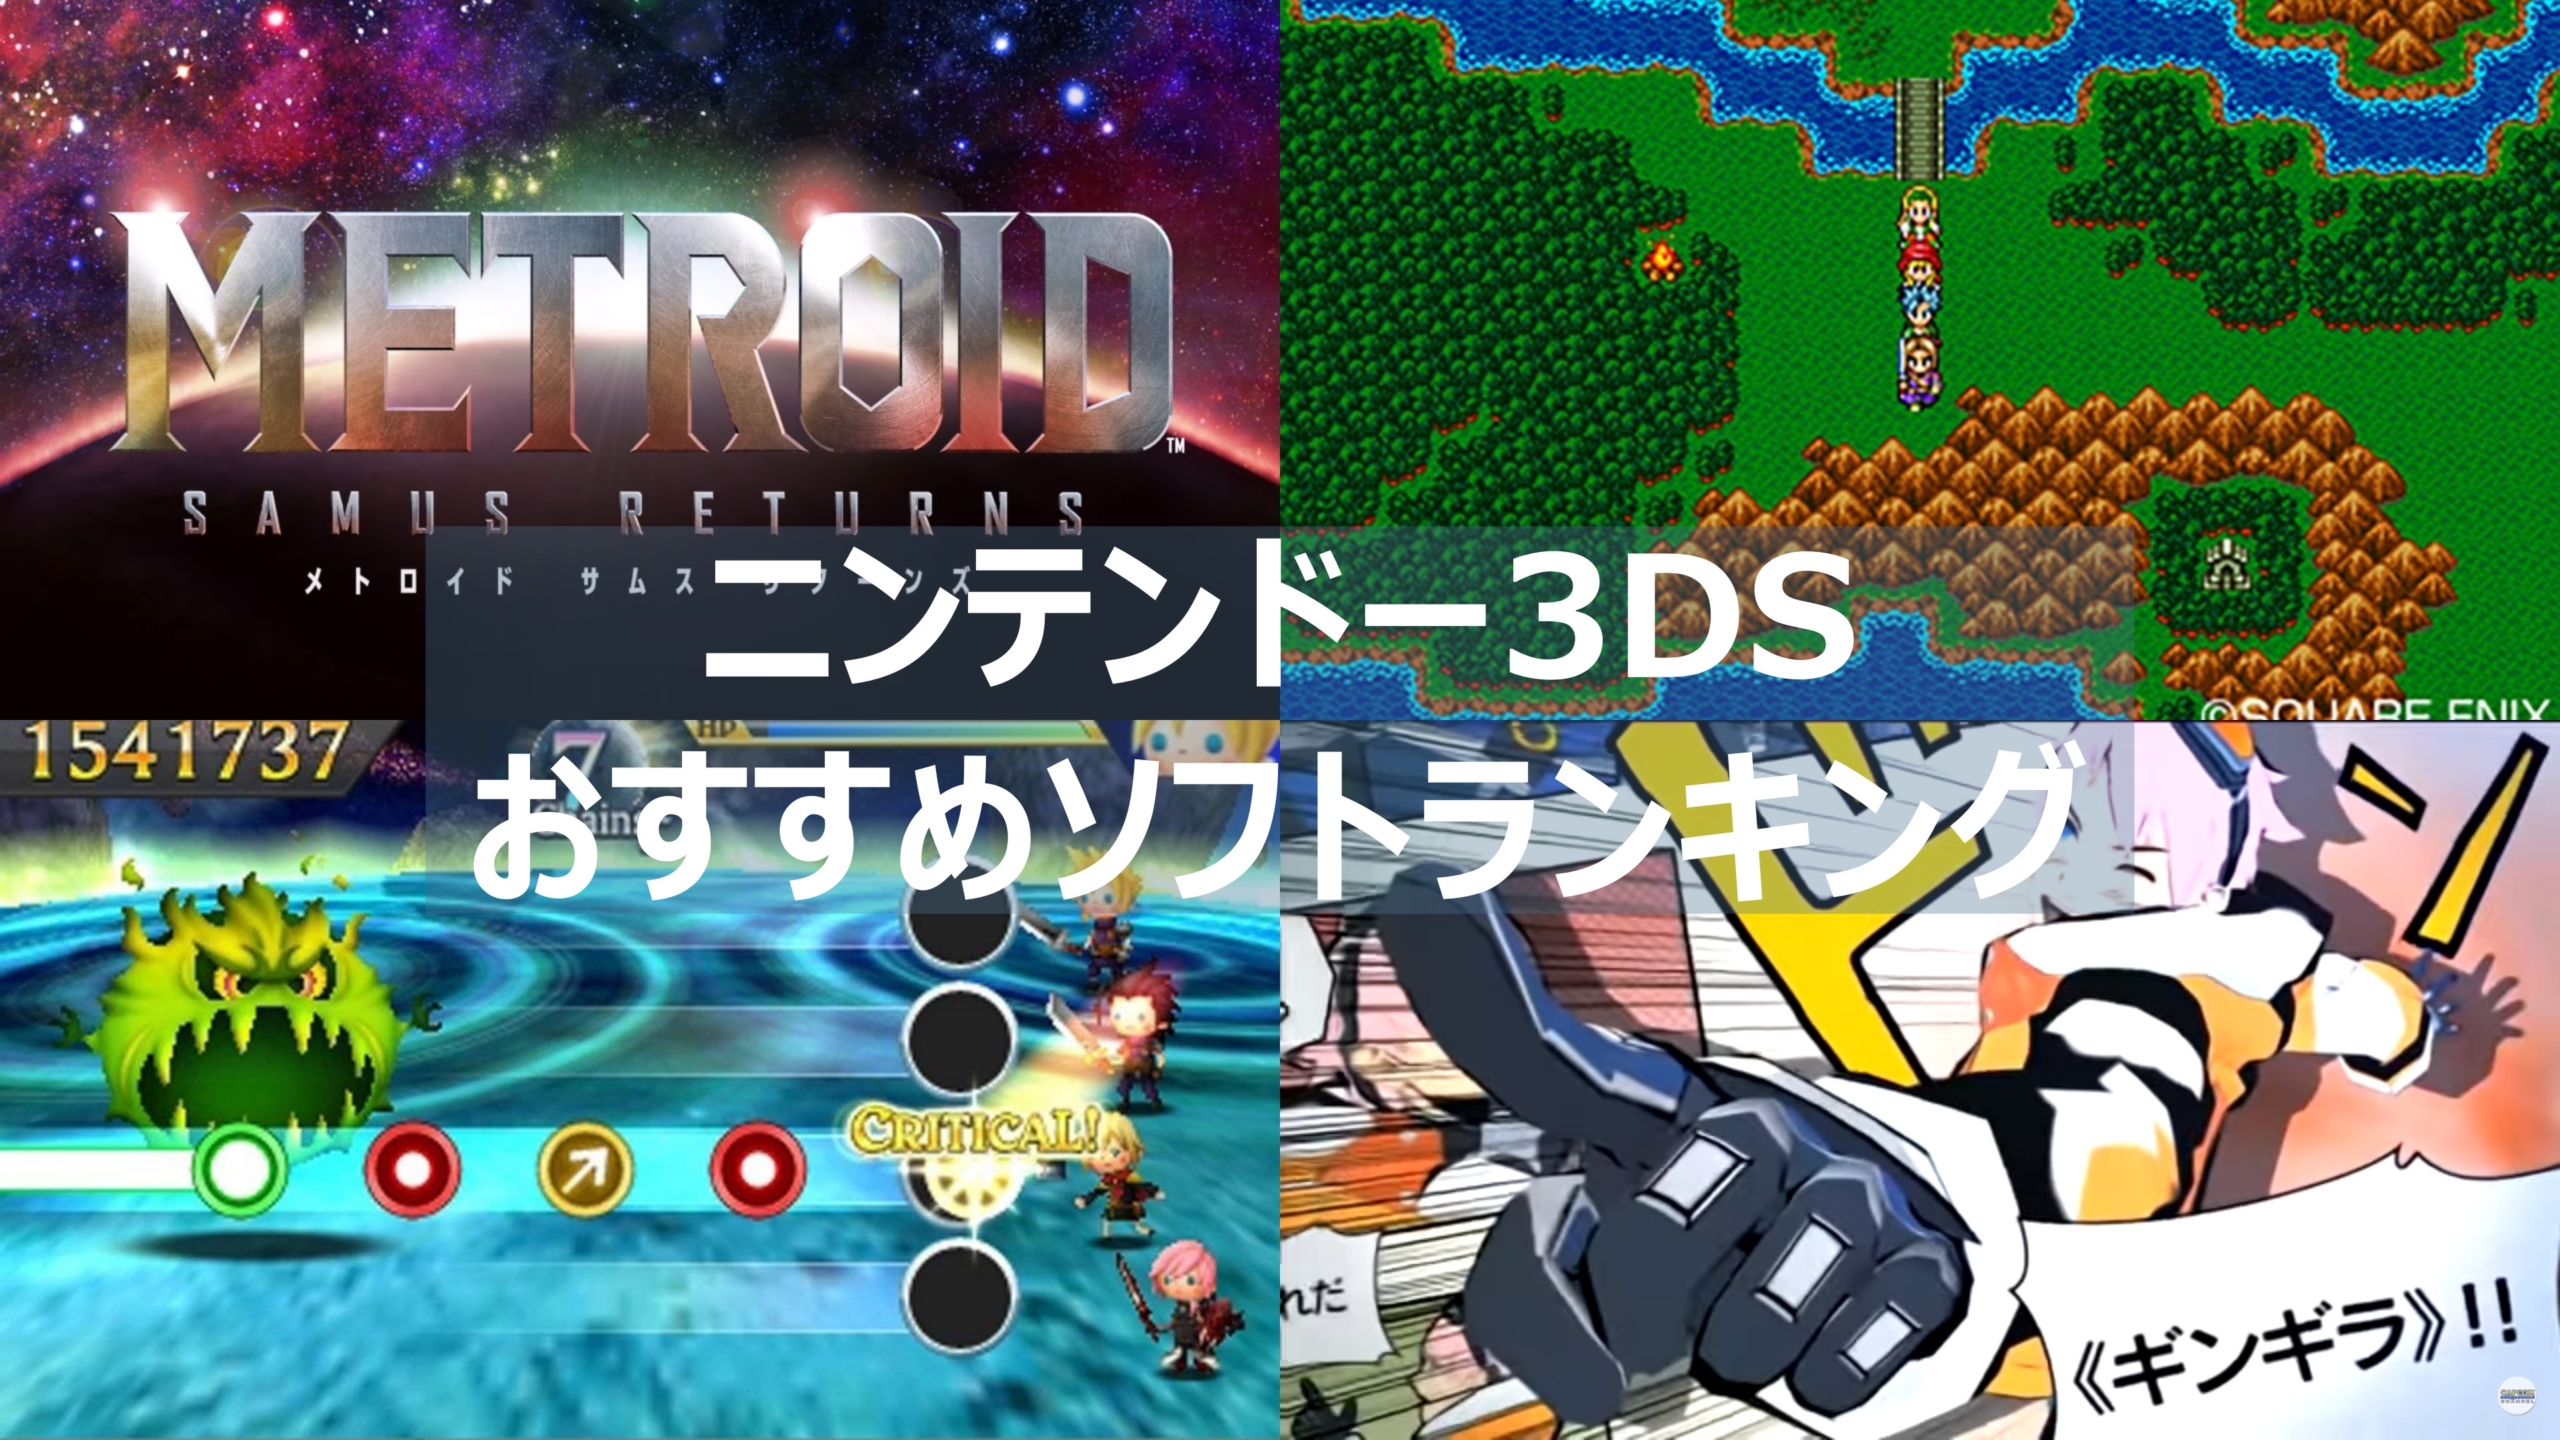 3ds 対戦 ソフト 最高のイラストと図面